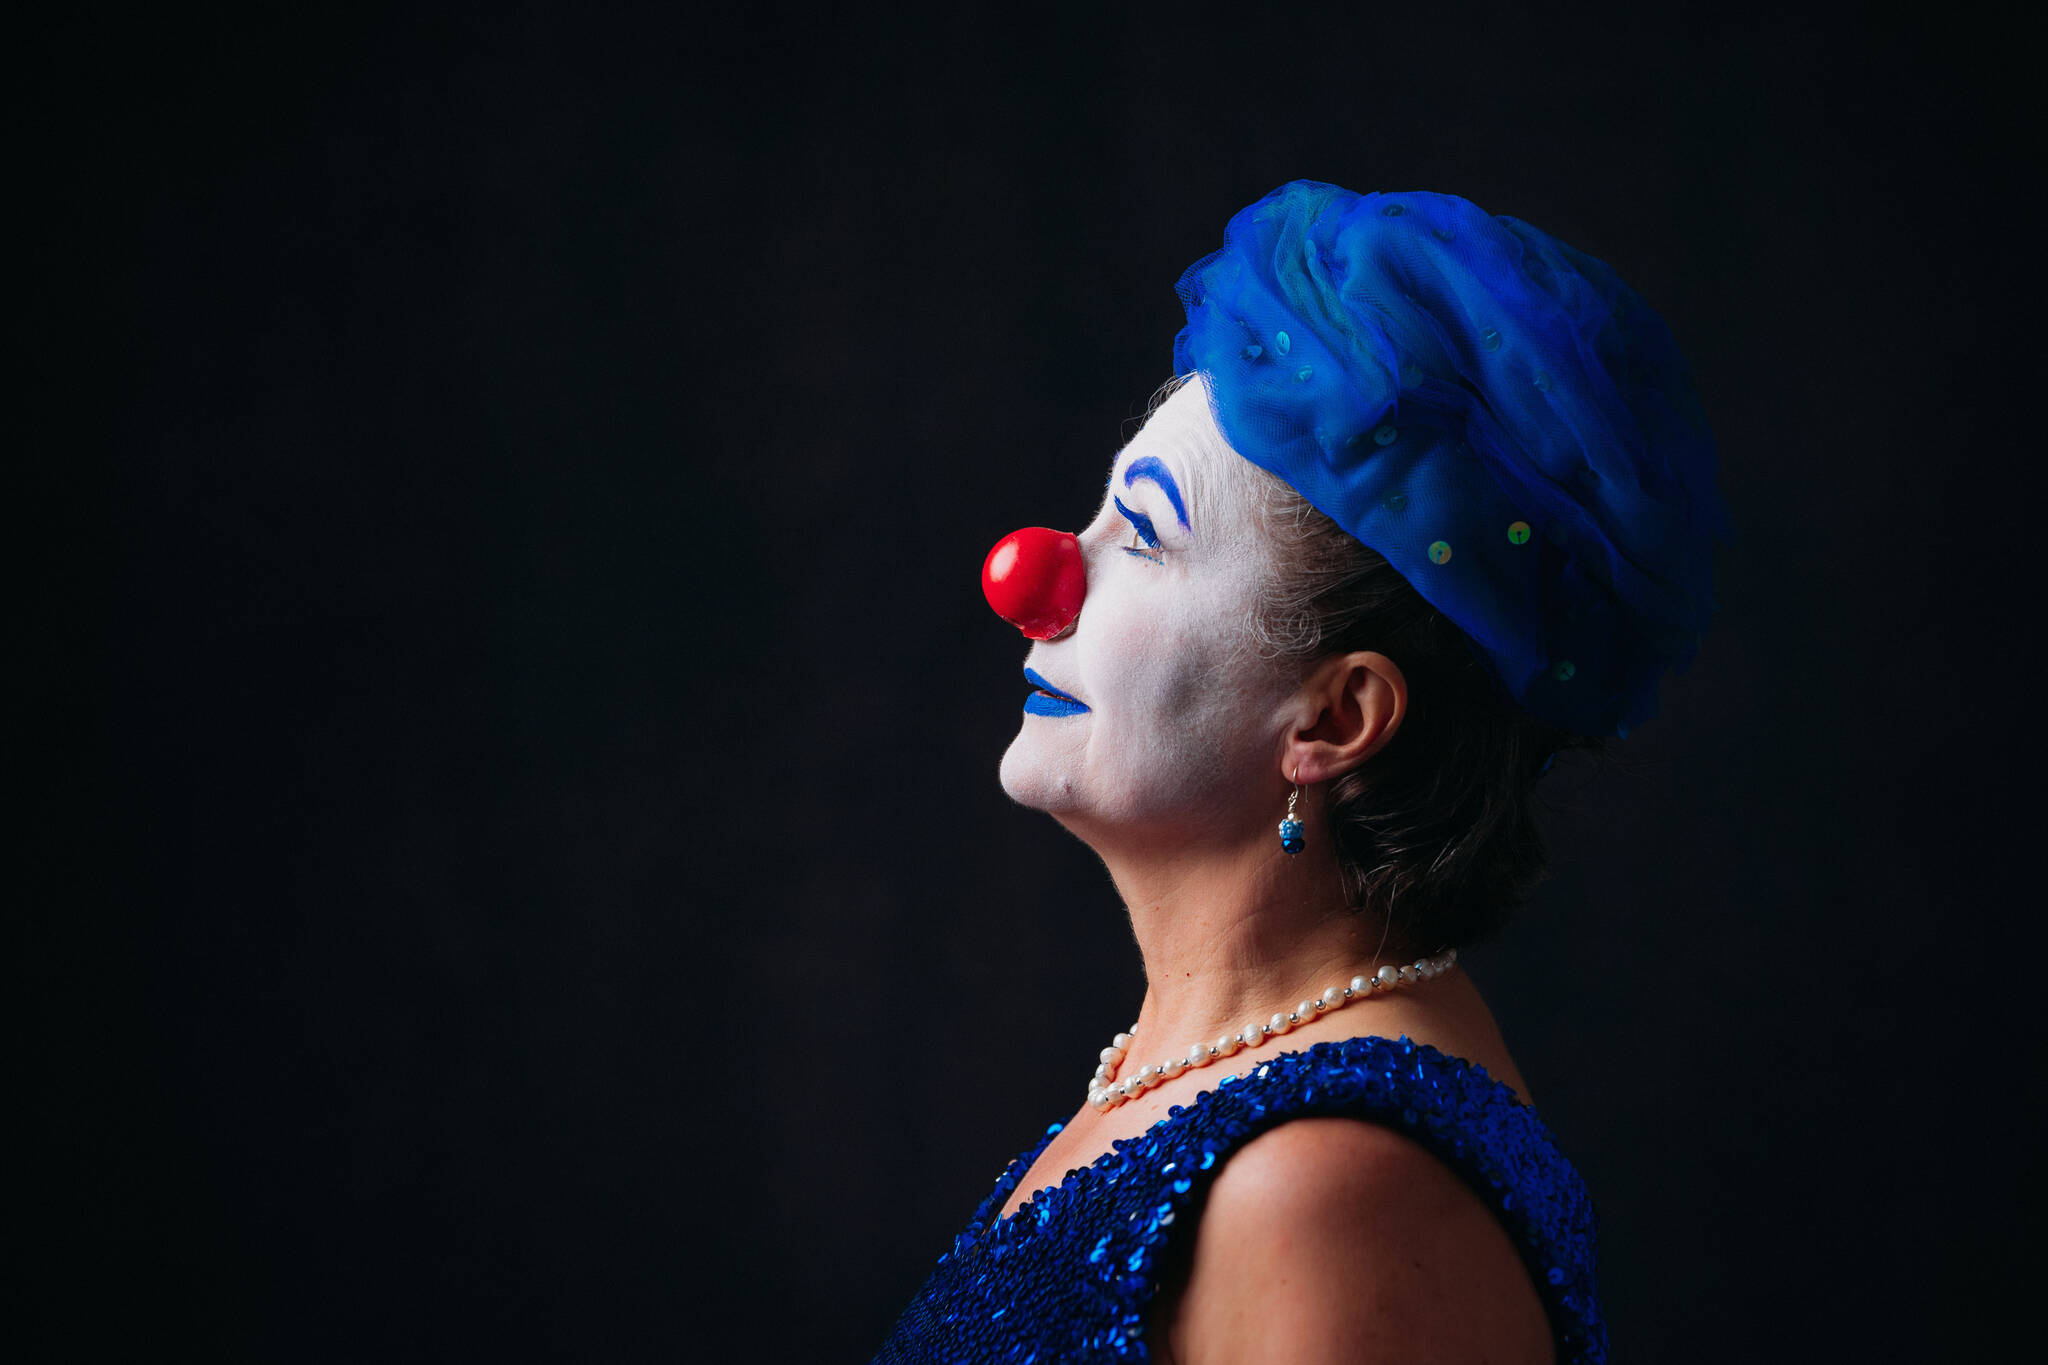 Diana Kolpak feels that clowns are a “powerful archetype in our psyches.” Photo by Ali Roddam